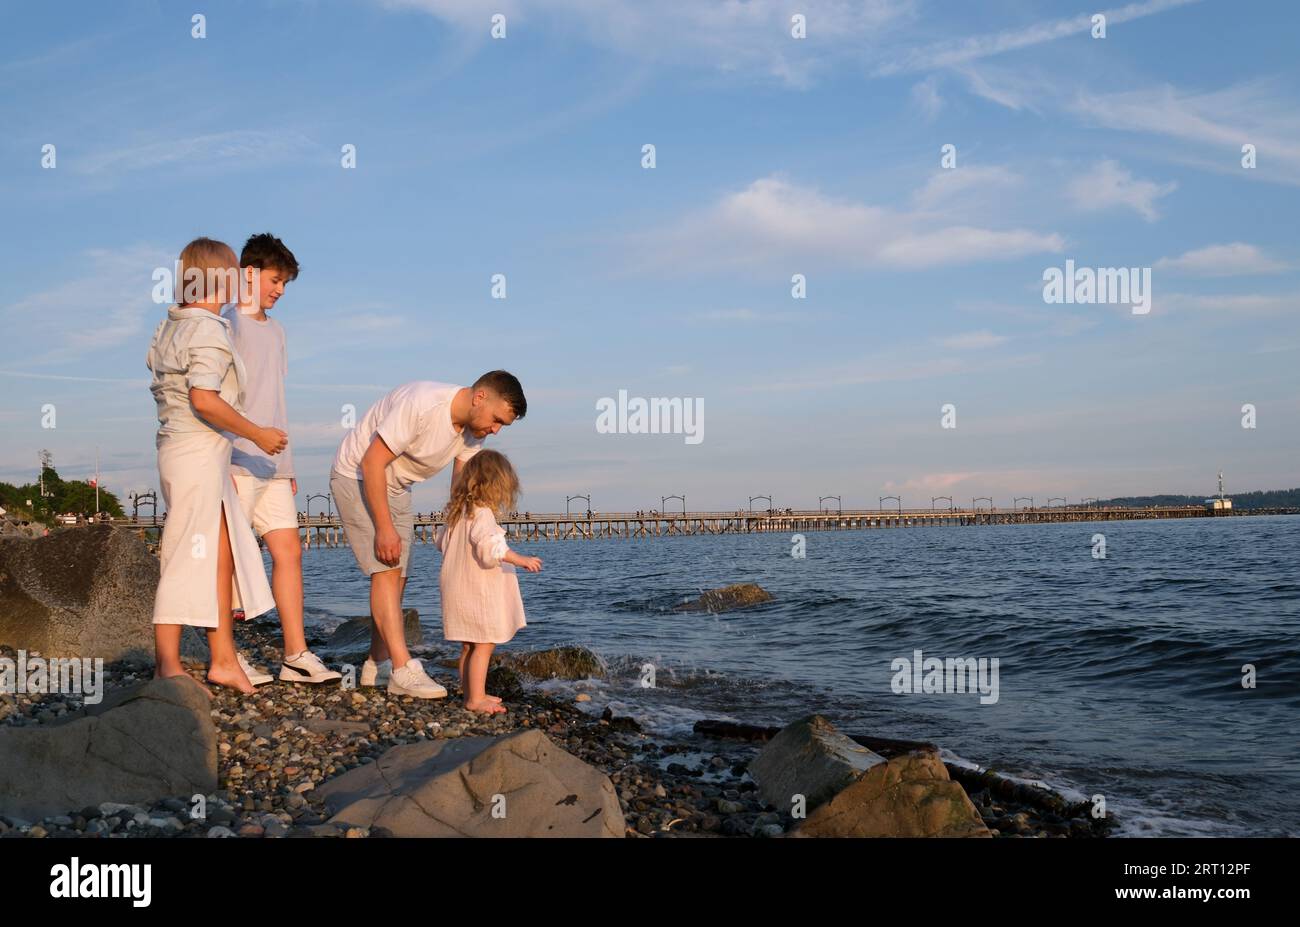 Happy family celebrating little girl's birthday on the seashore mom brings a box with cake girl opens a gift dad mom brother and sister on the ocean shore. on a sunny day Stock Photo